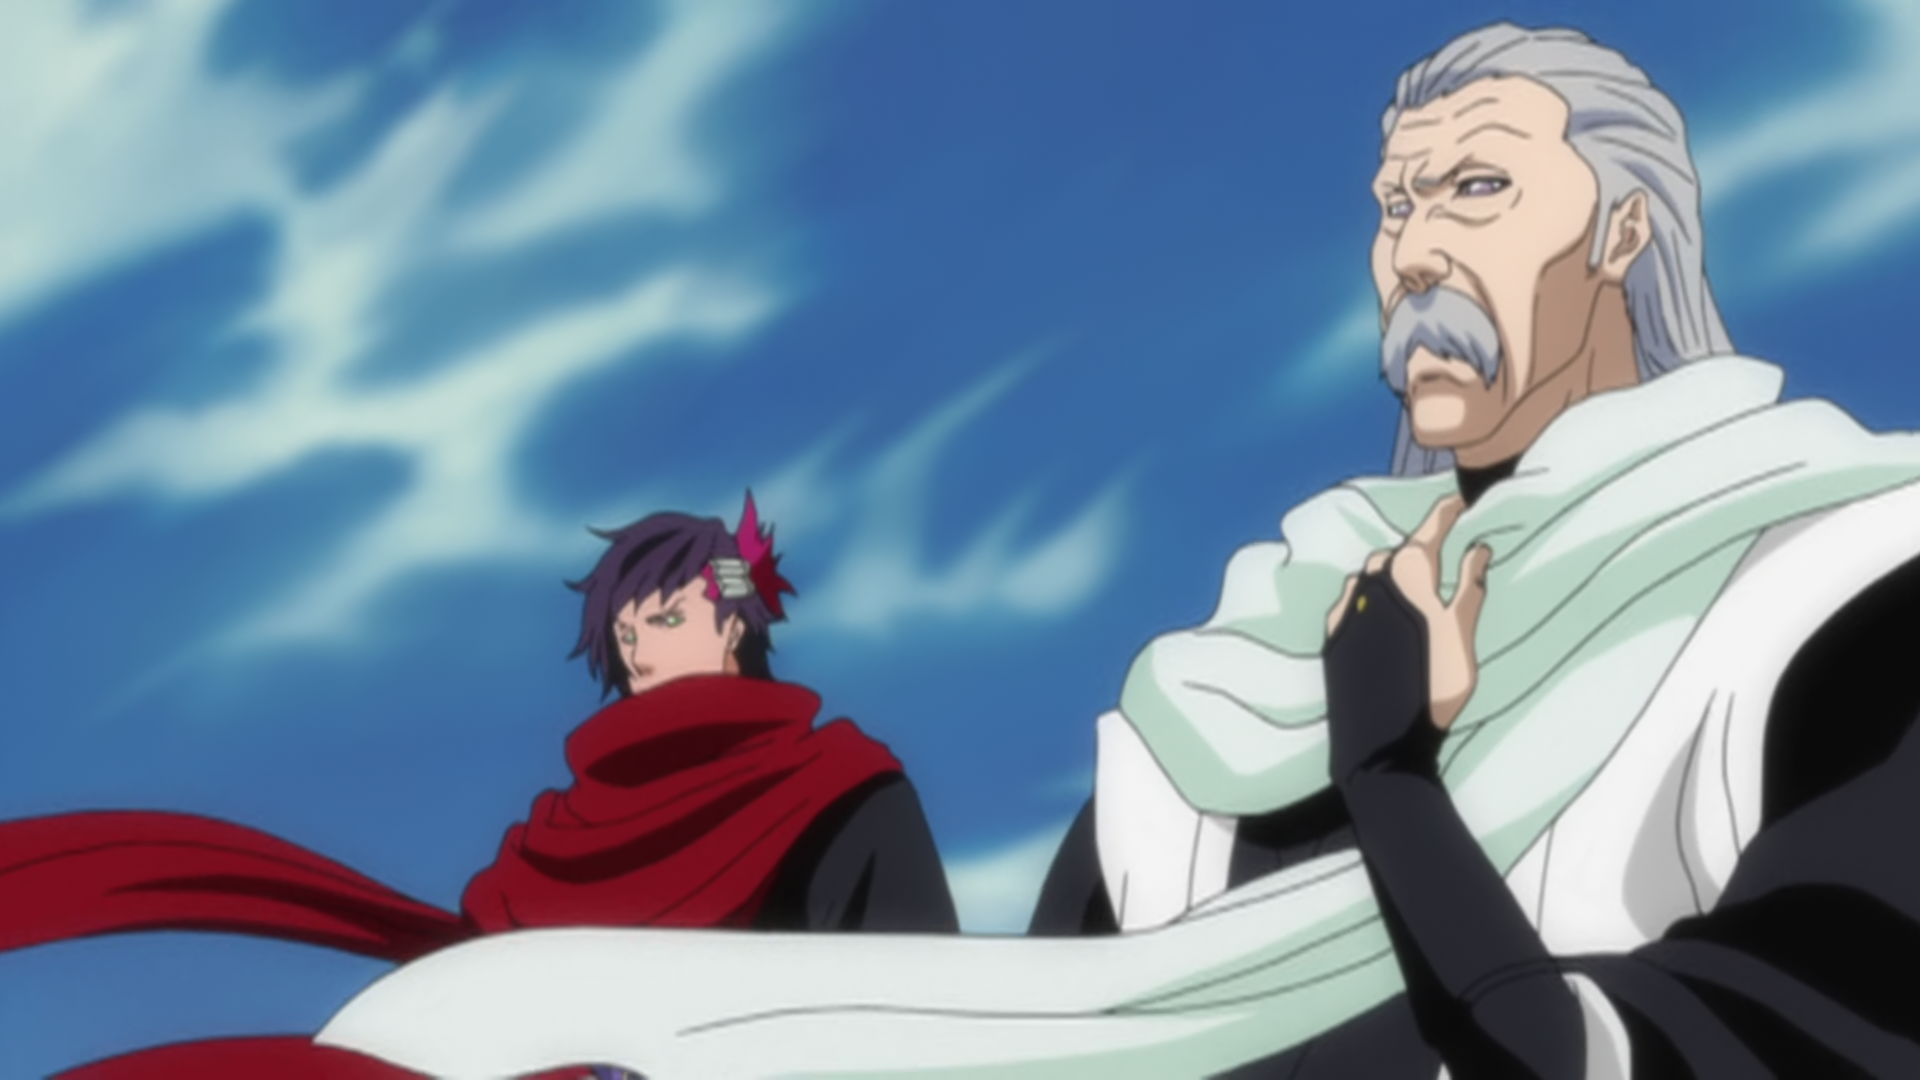 That Man, For the Sake of the Kuchiki - Bleach Wiki - Your guide to the ...